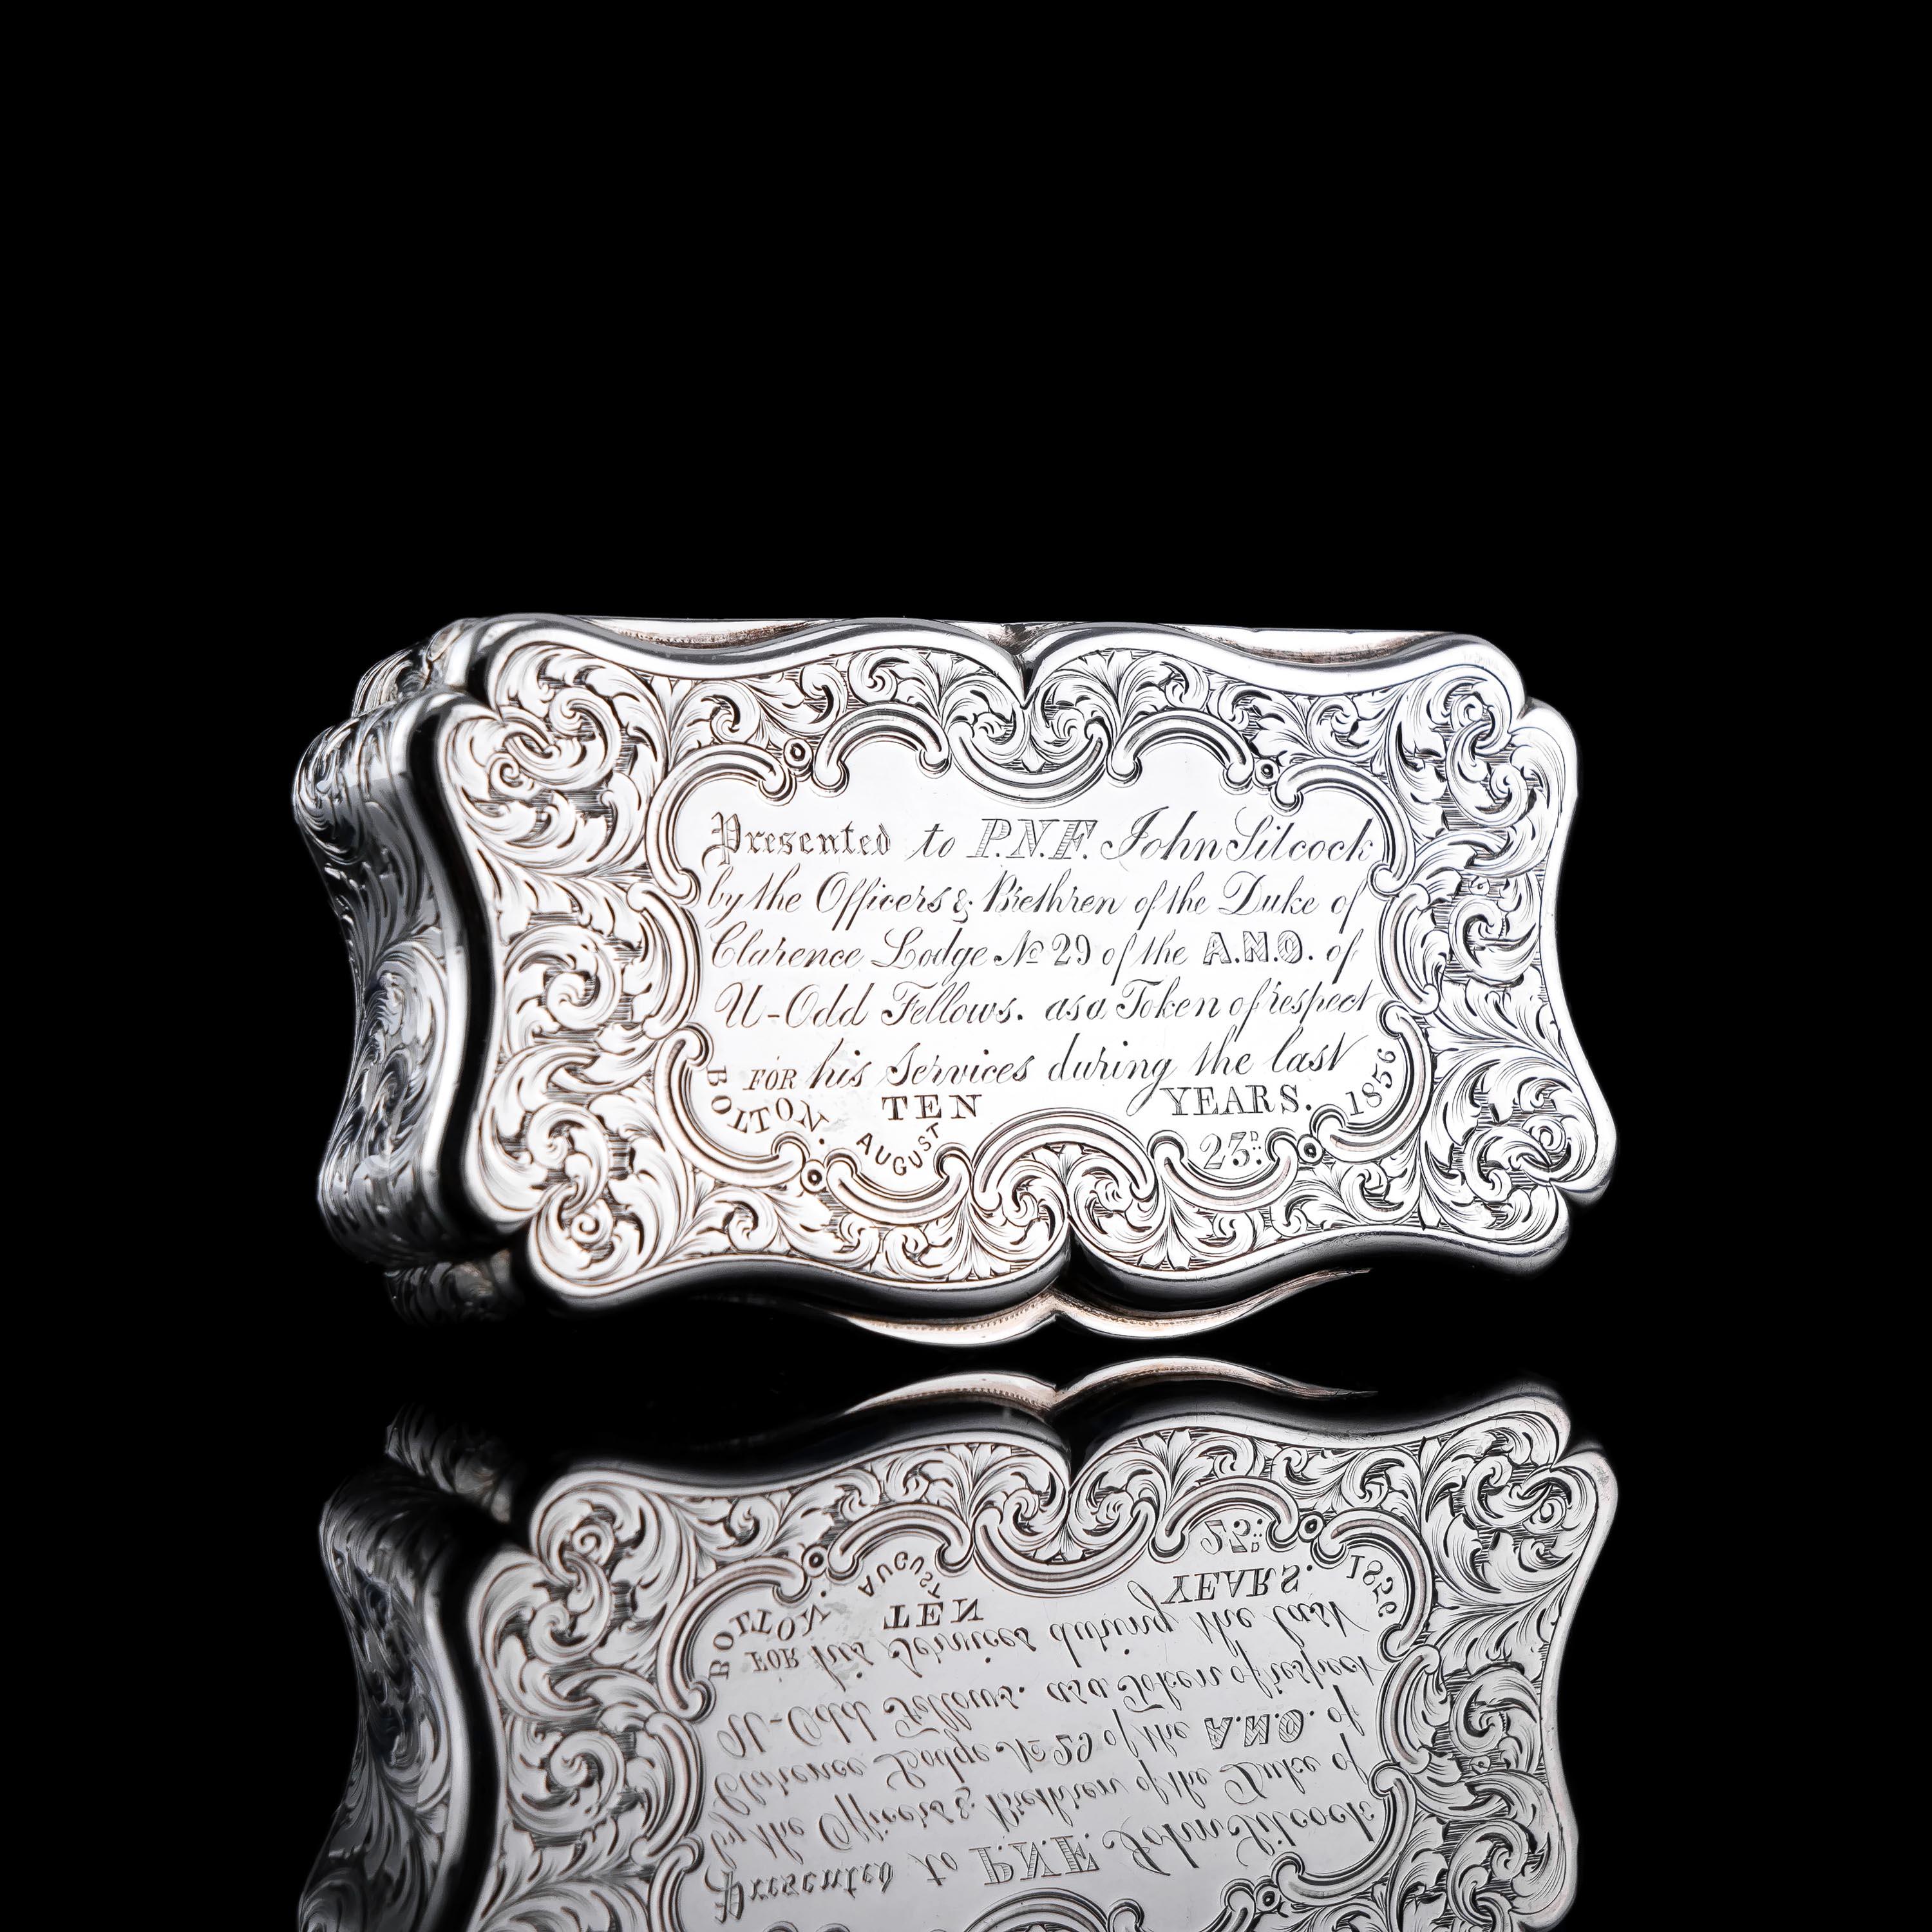 Antique Victorian Sterling Silver Snuff Box with Fine Engravings - 1850 2